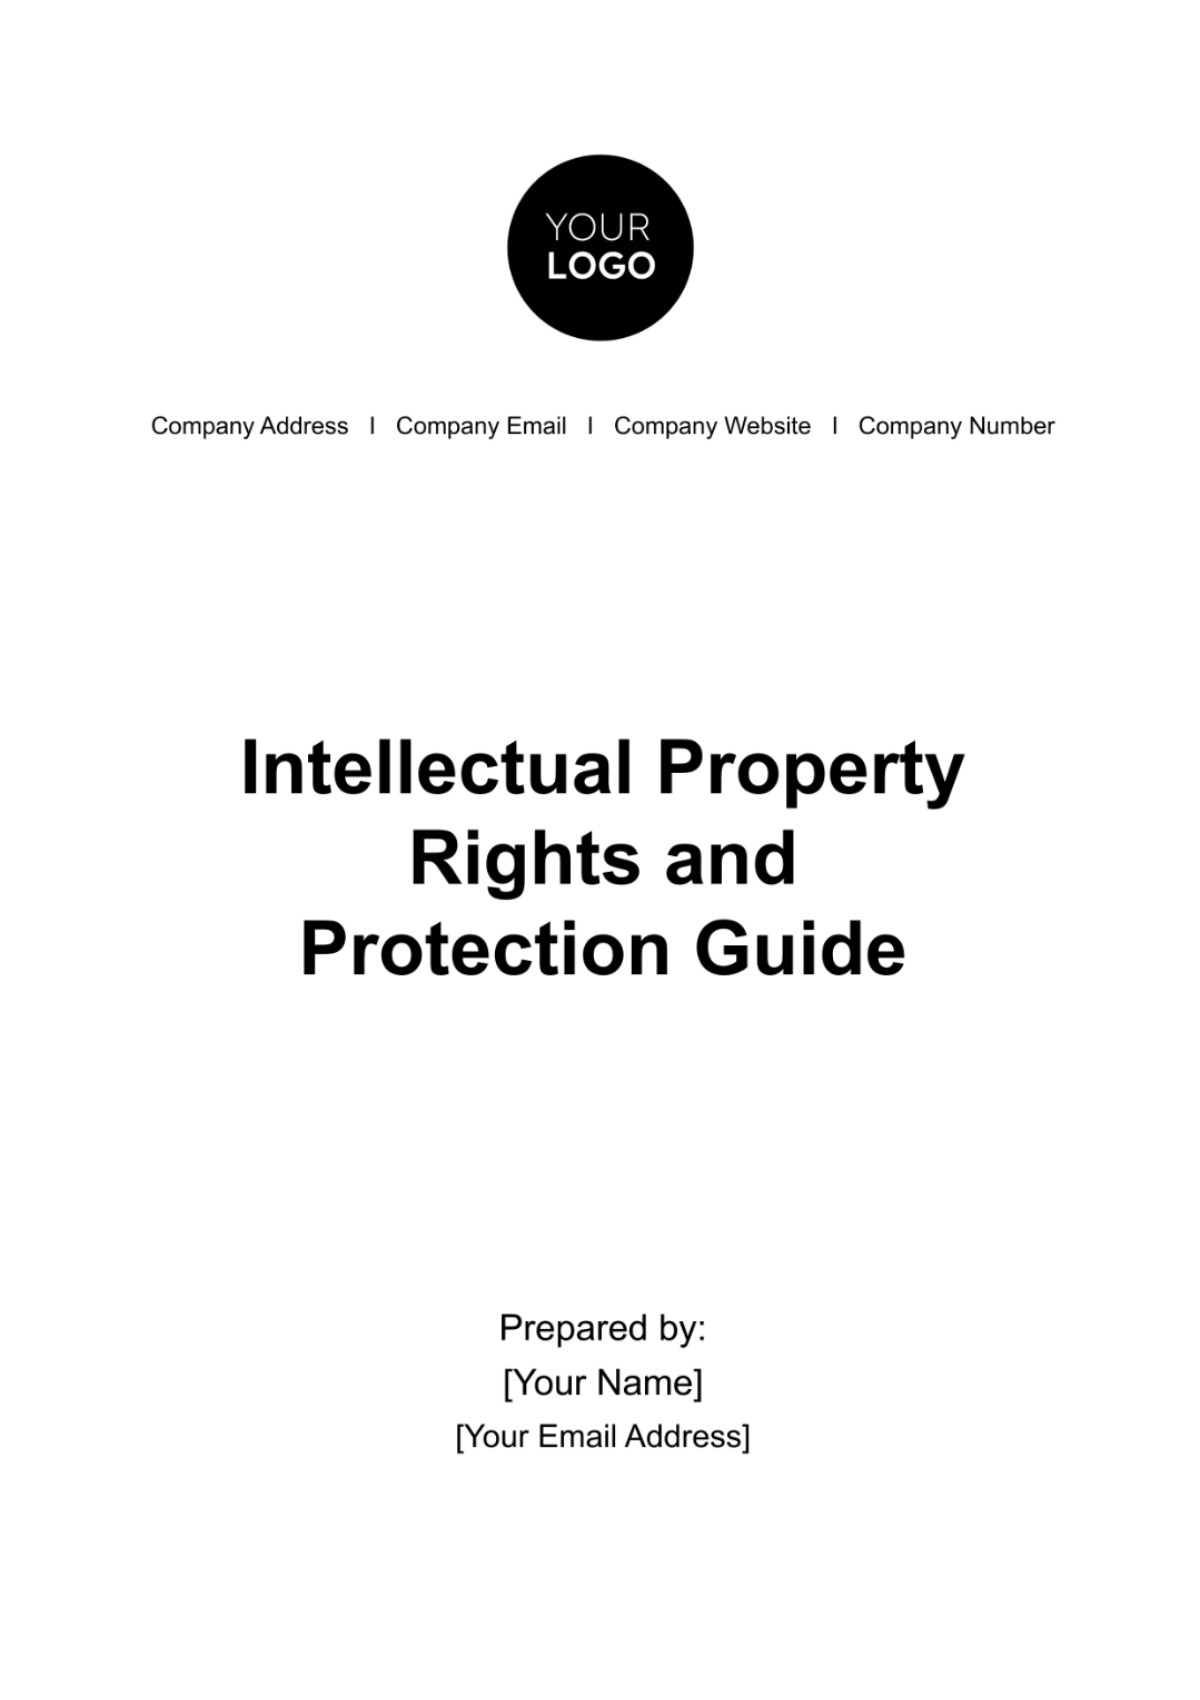 Free Intellectual Property Rights and Protection Guide HR Template